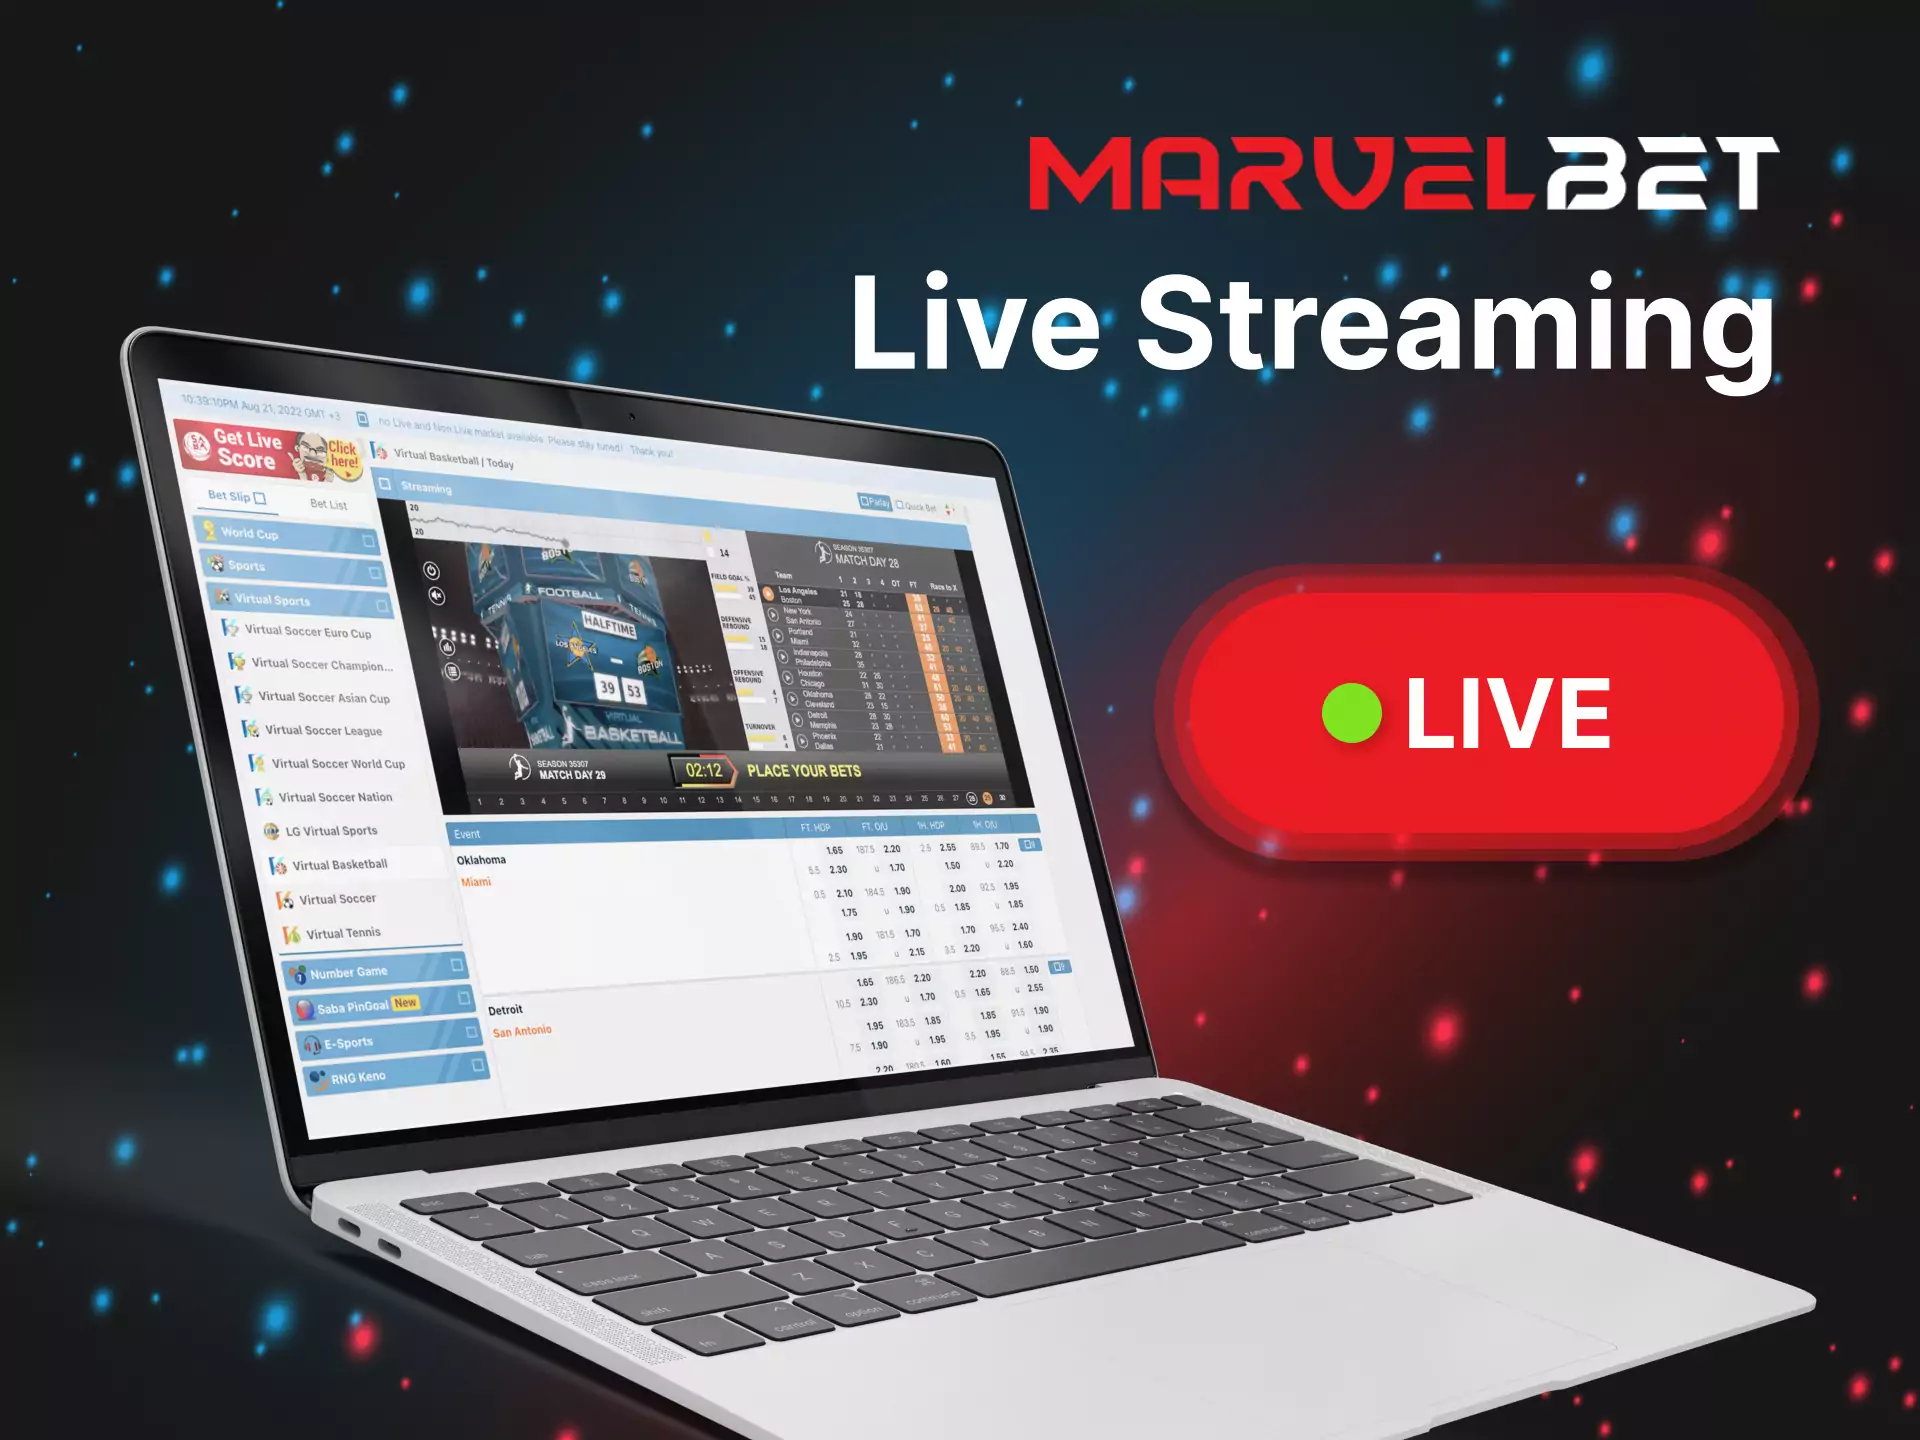 Follow the match on the Marvelbet Live Streaming.